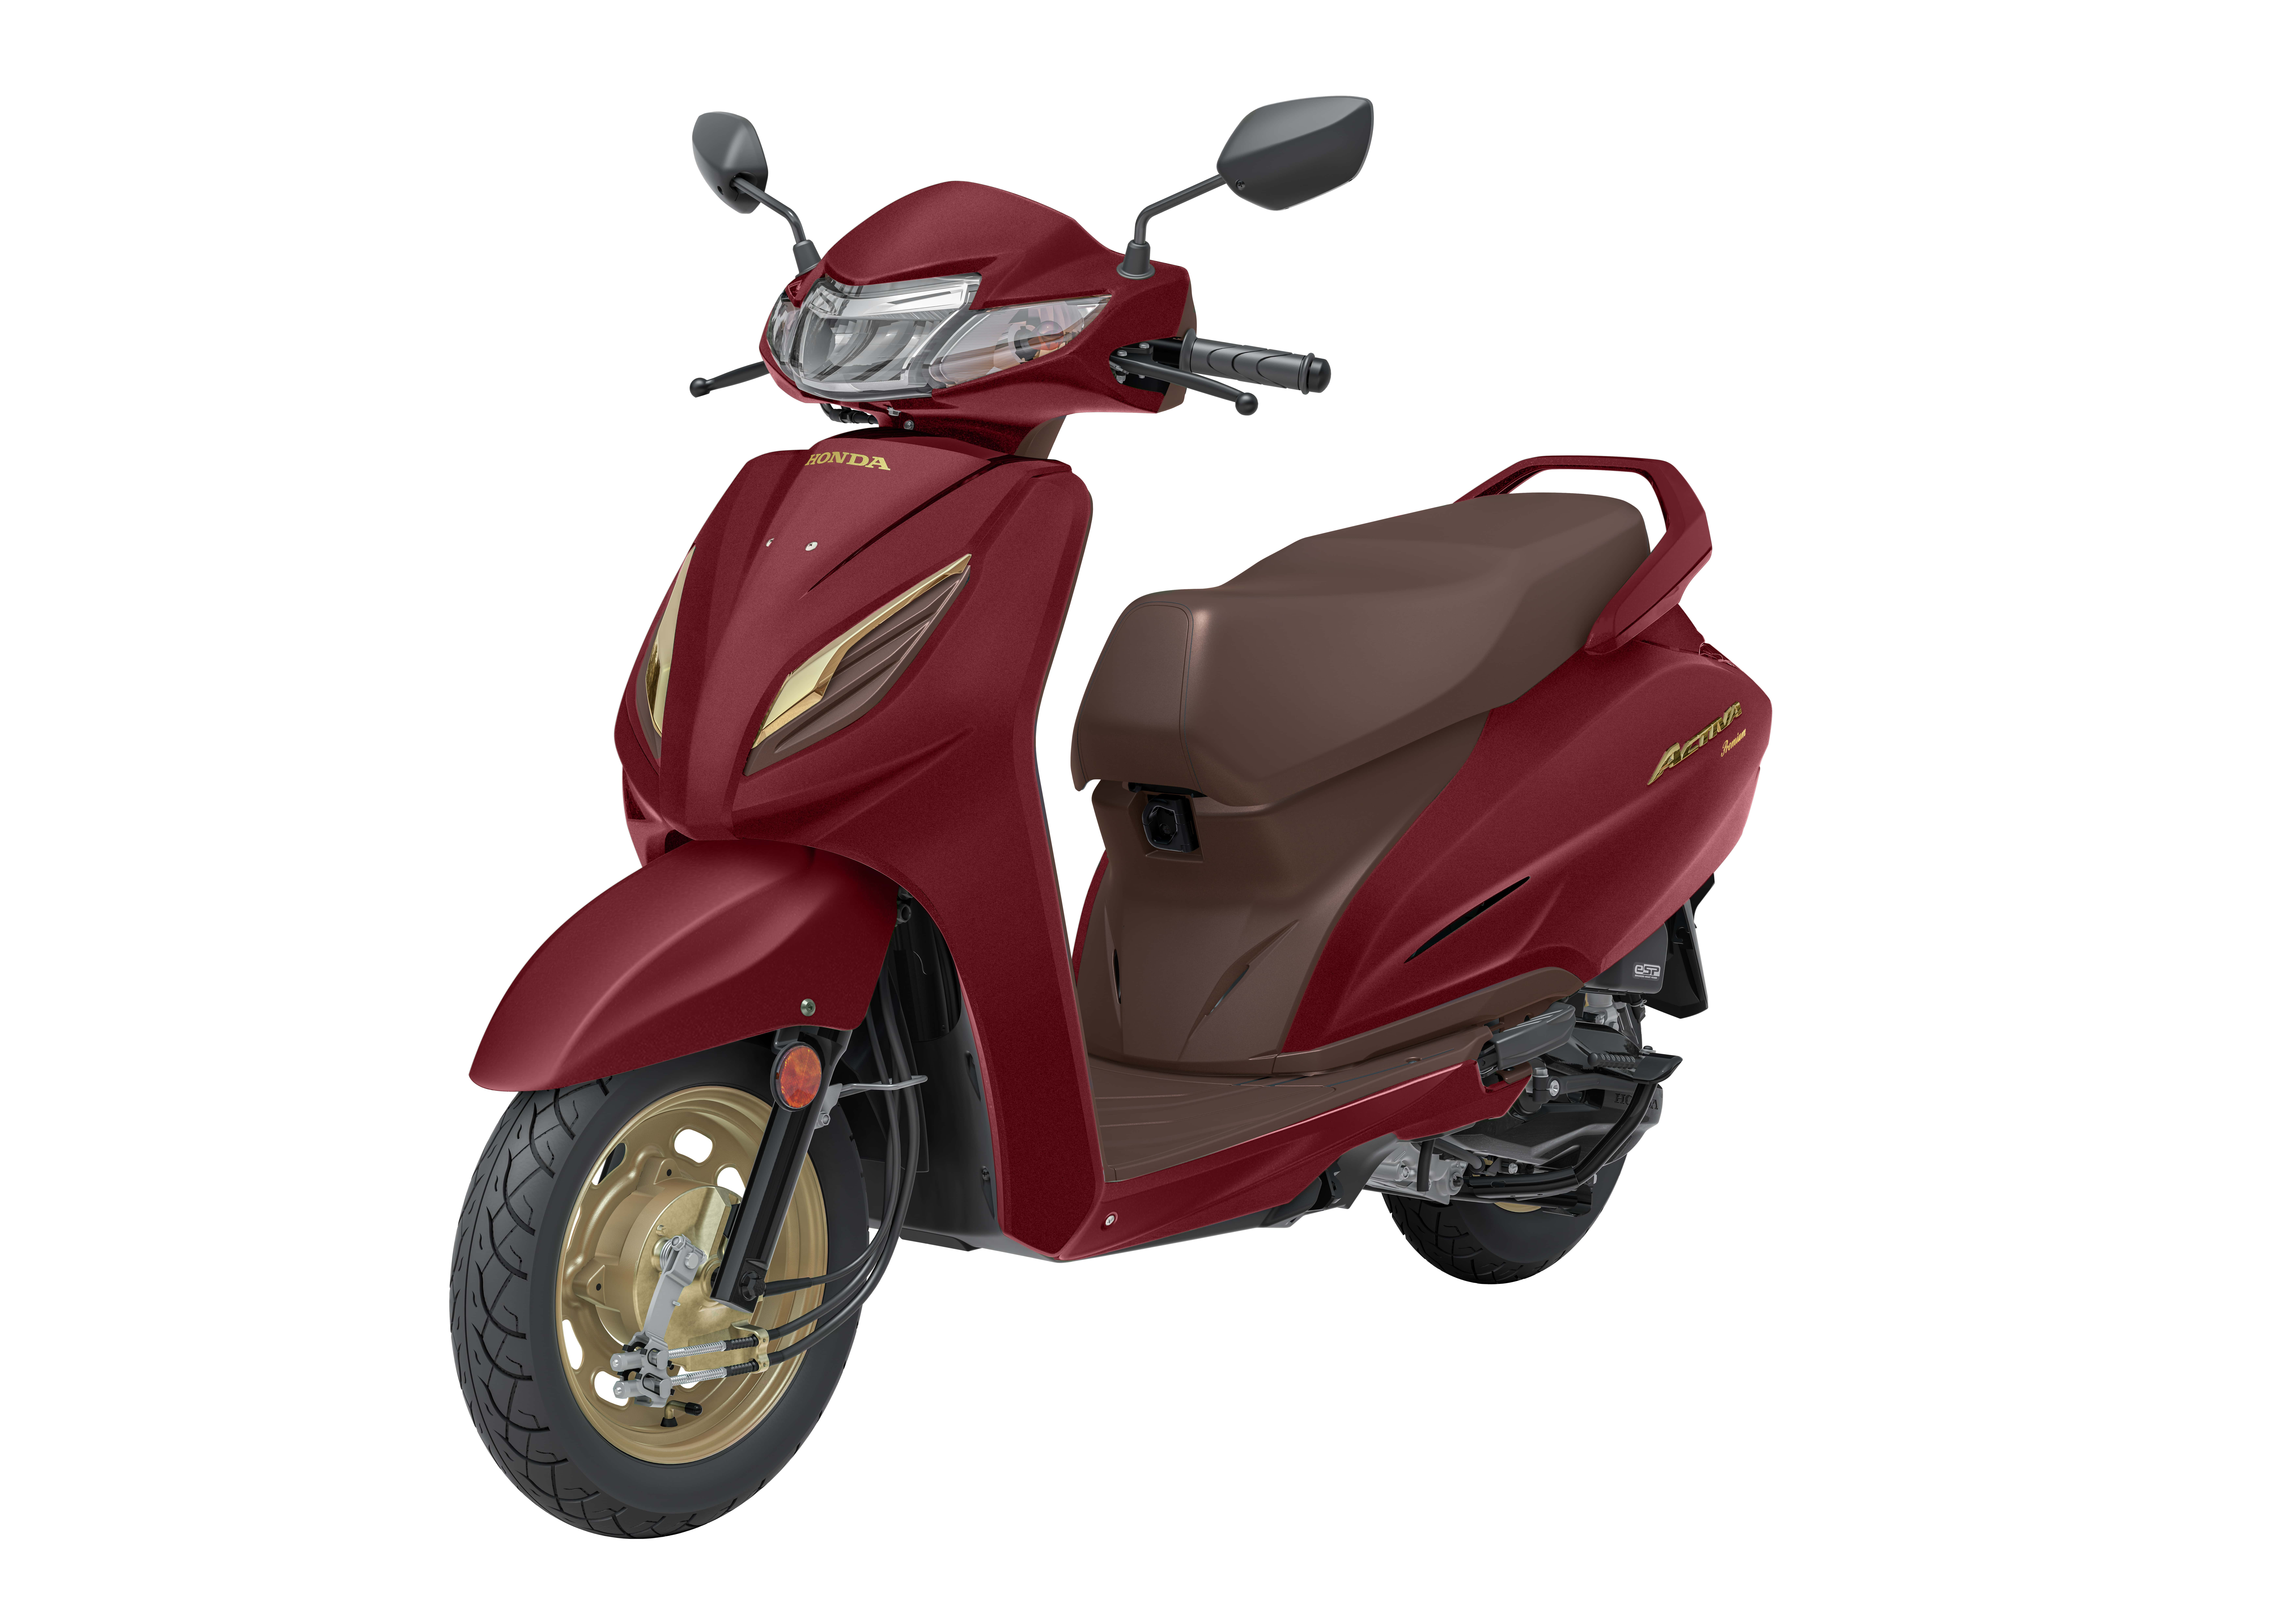 Honda Motorcycle & Scooter India introduces the all-new 2022 Activa Premium Edition